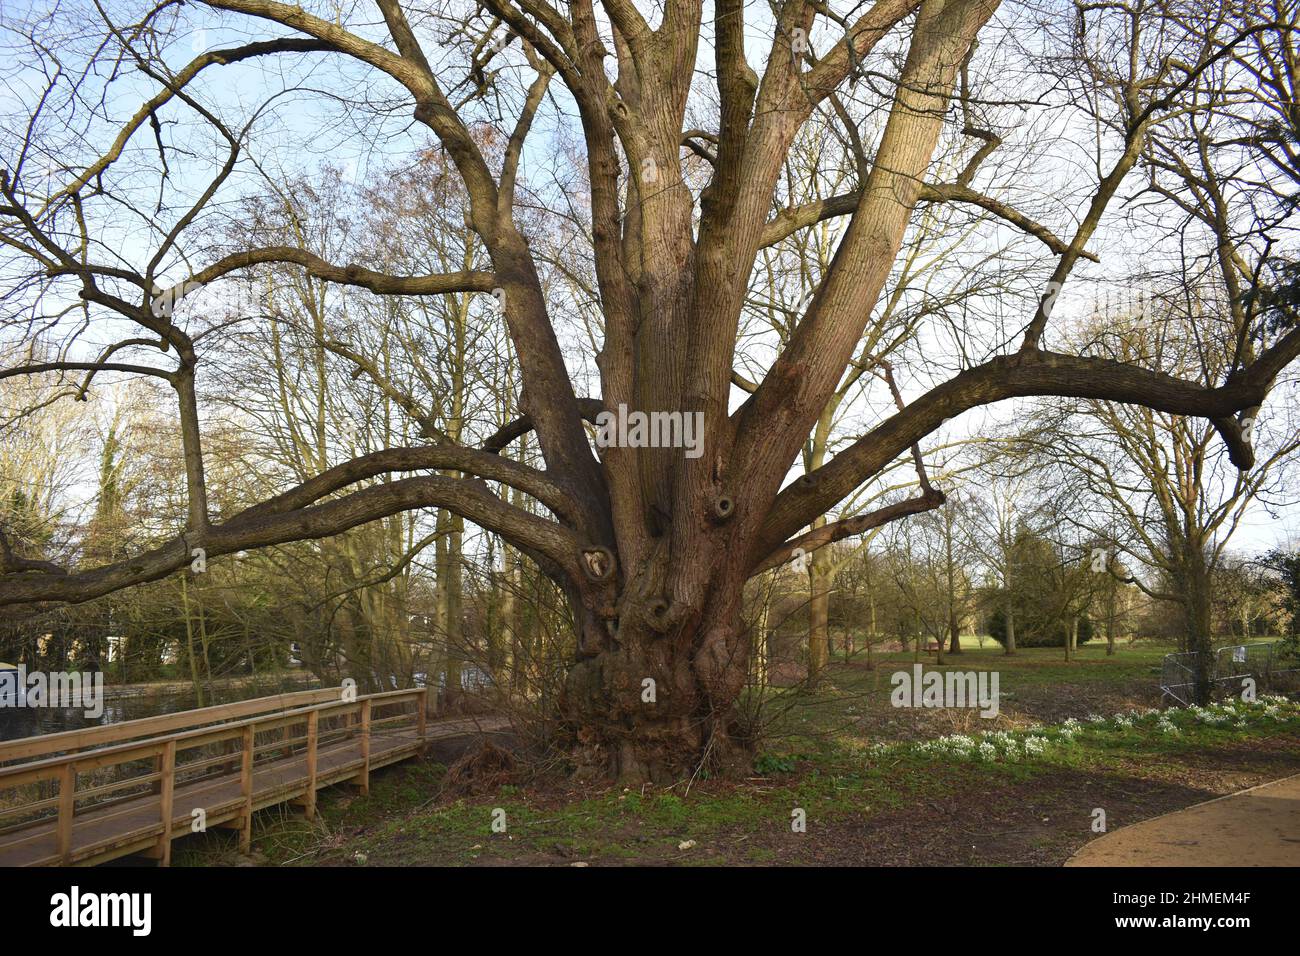 This ancient lime tree (Tilia) at Great Linford Manor Park in Milton Keynes is thought to be over 300 years old. Stock Photo